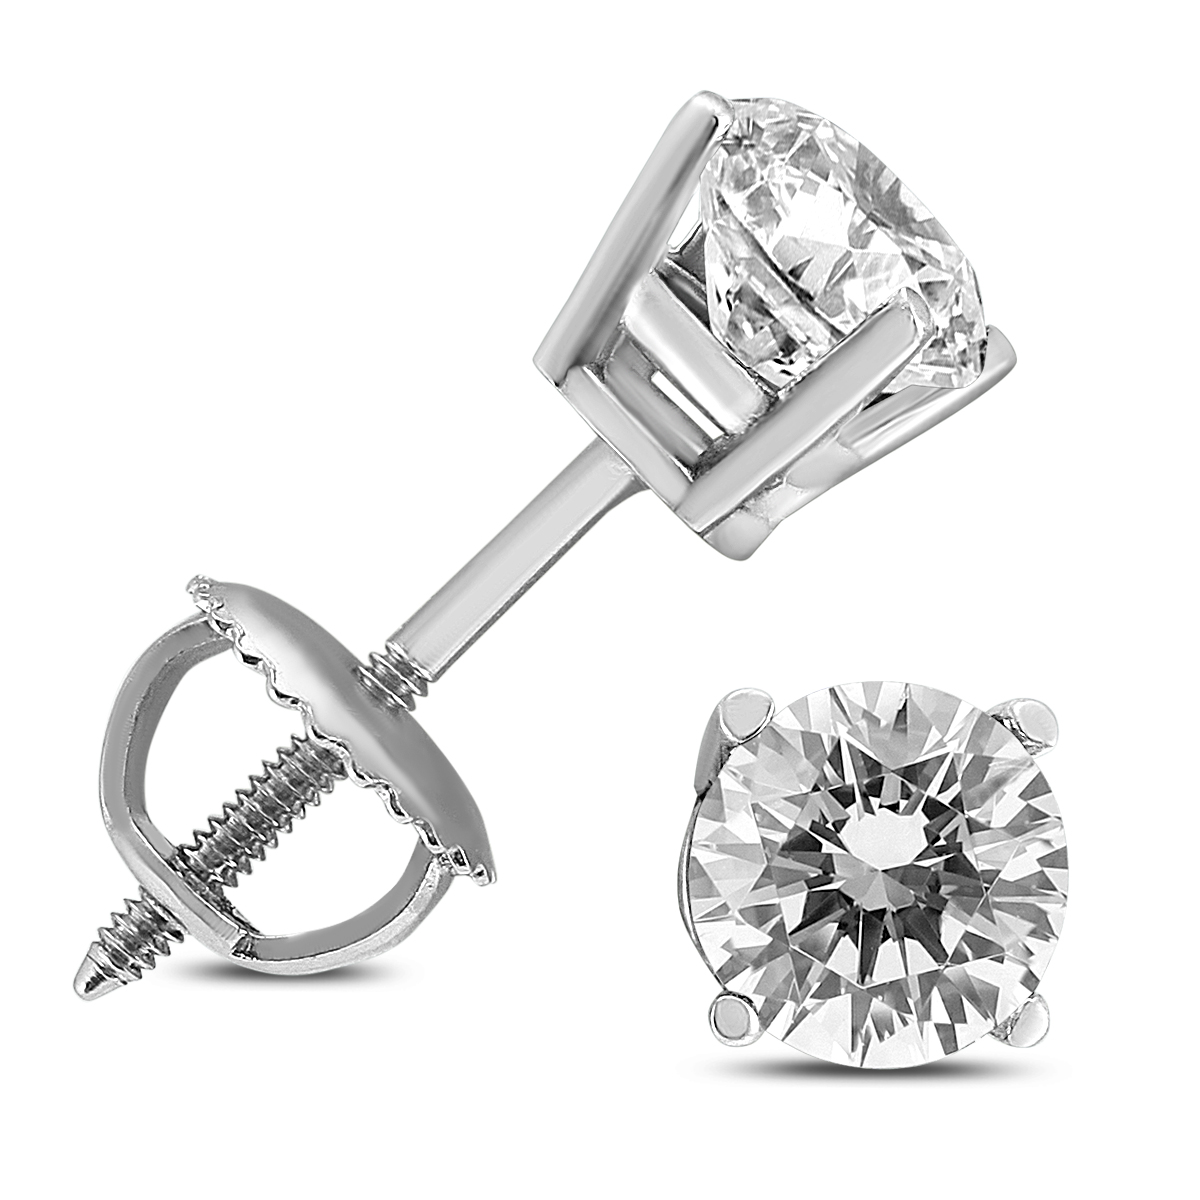 5/8 Carat TW AGS Certified Round Diamond Solitaire Stud Earrings in 14K White Gold